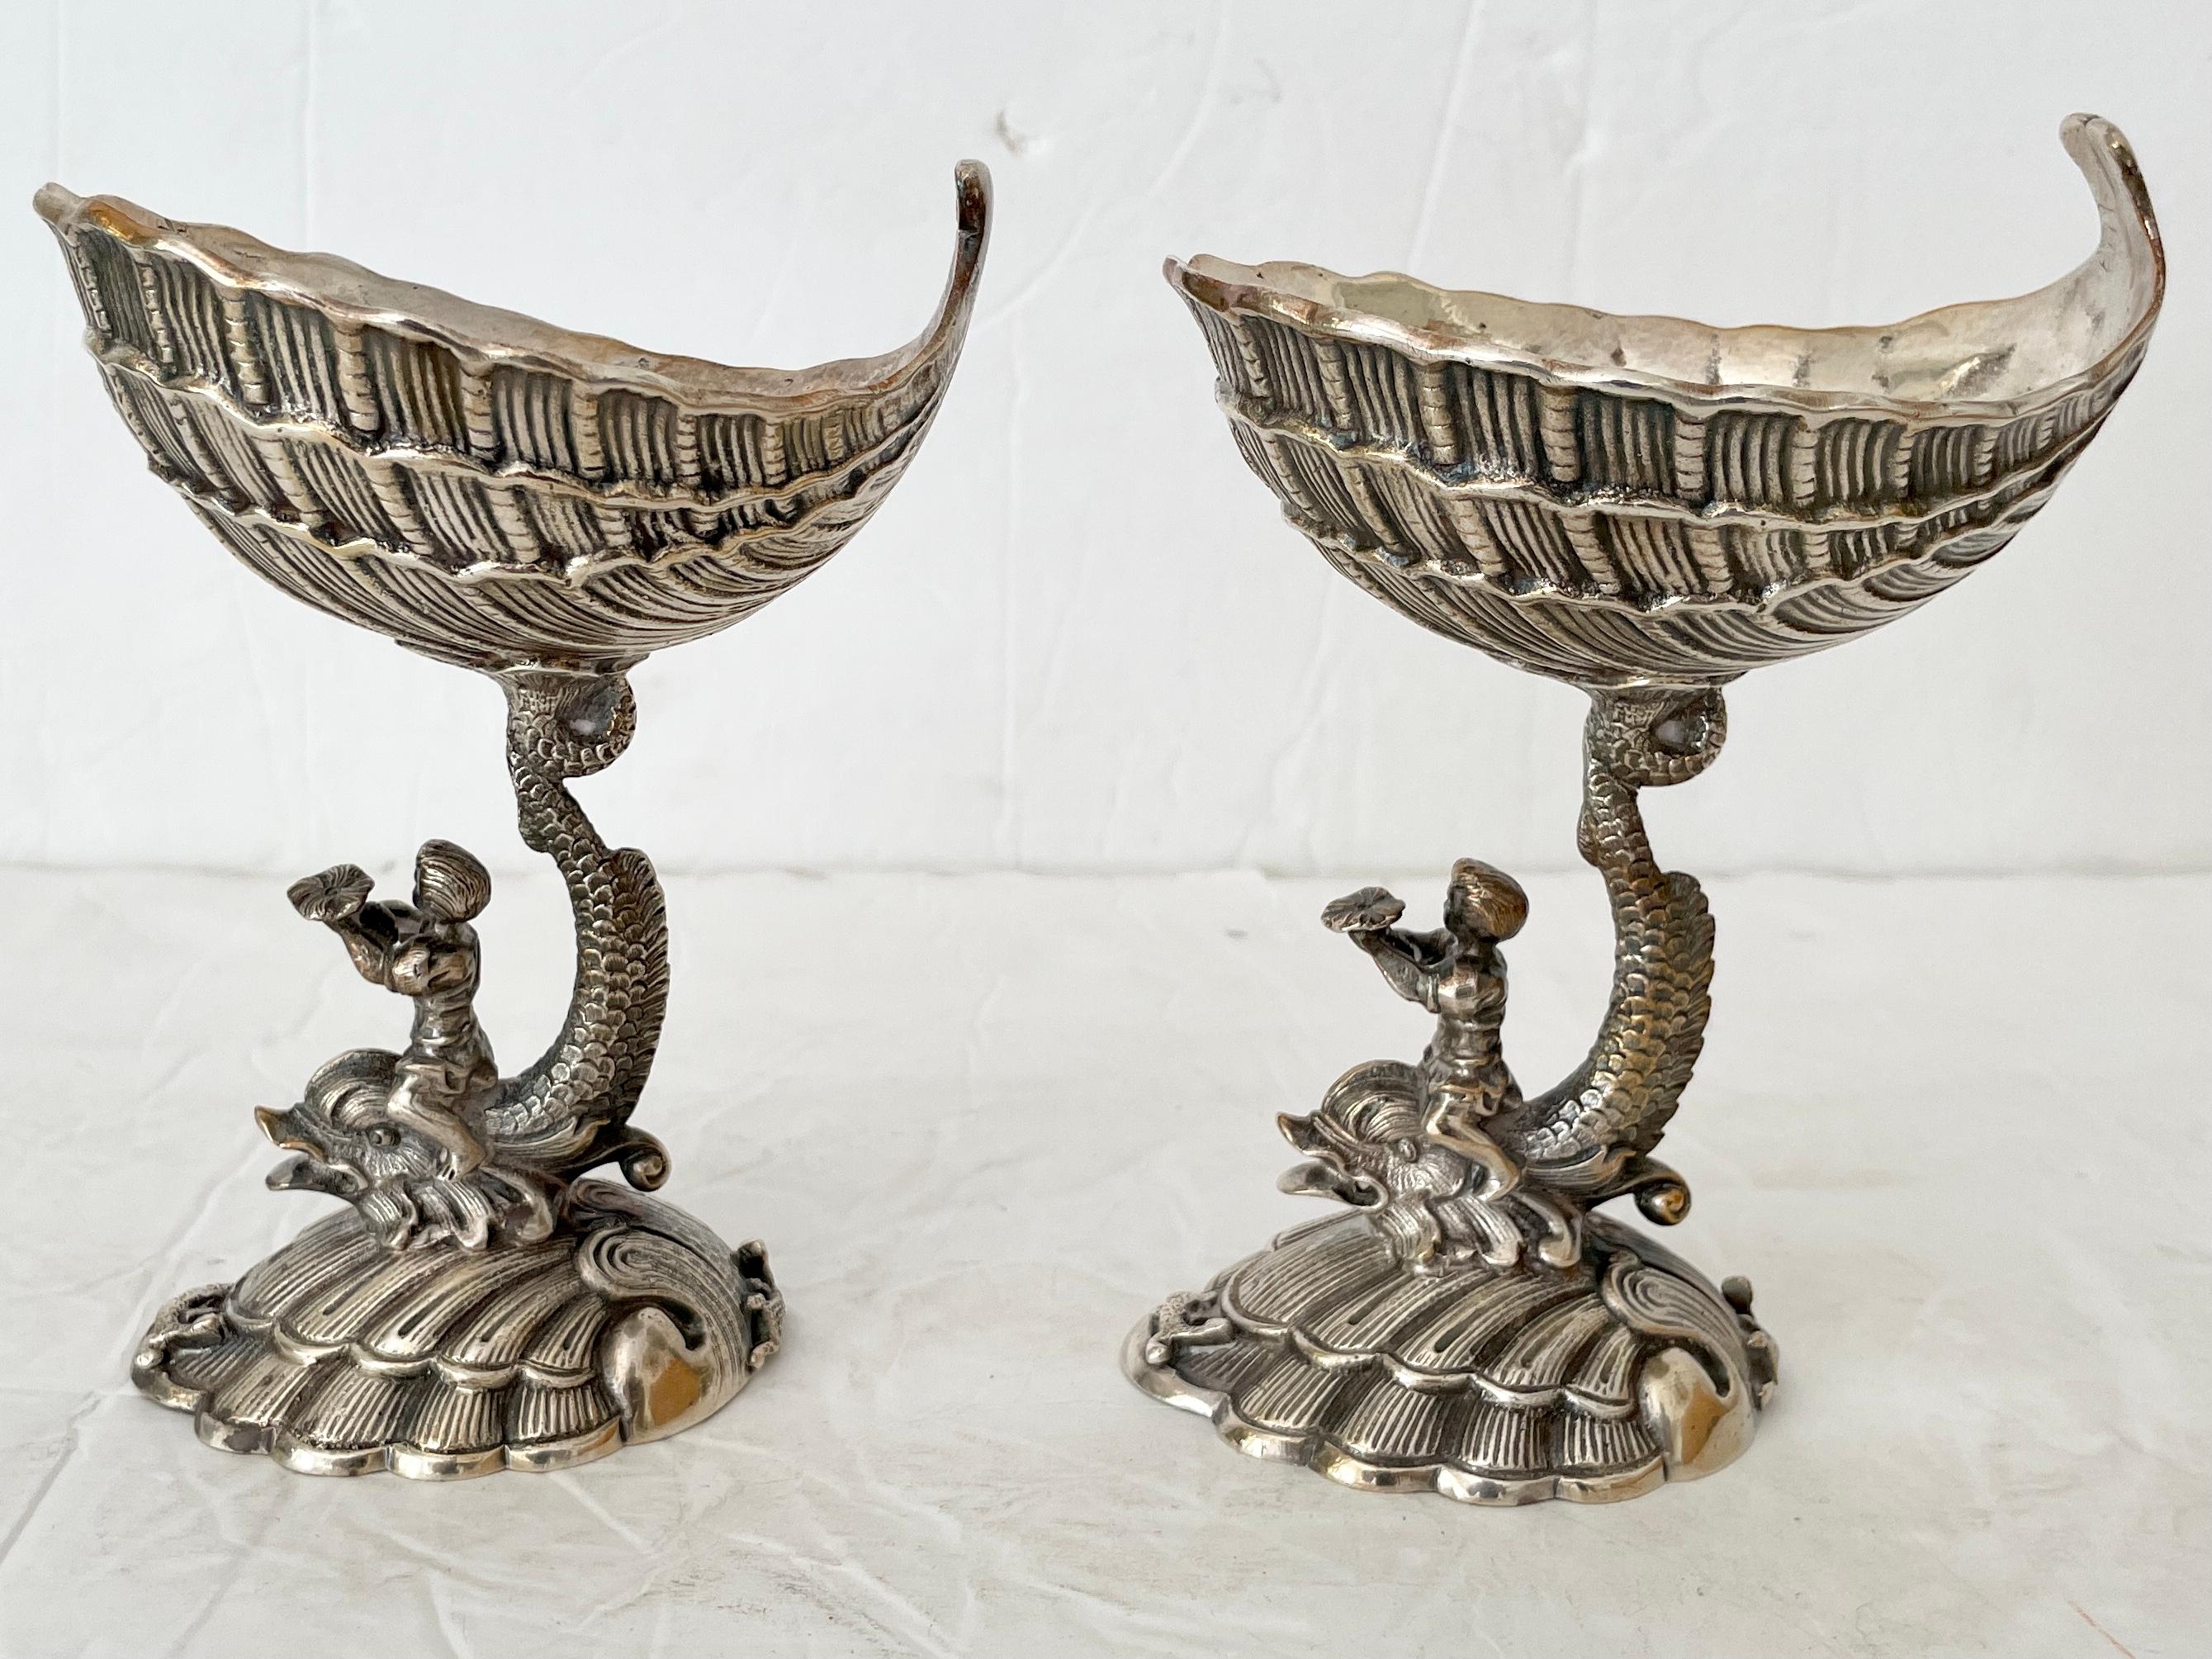 Beautiful pair of metal footed dish grotto style with men riding giant fish figurines. Great carving details.